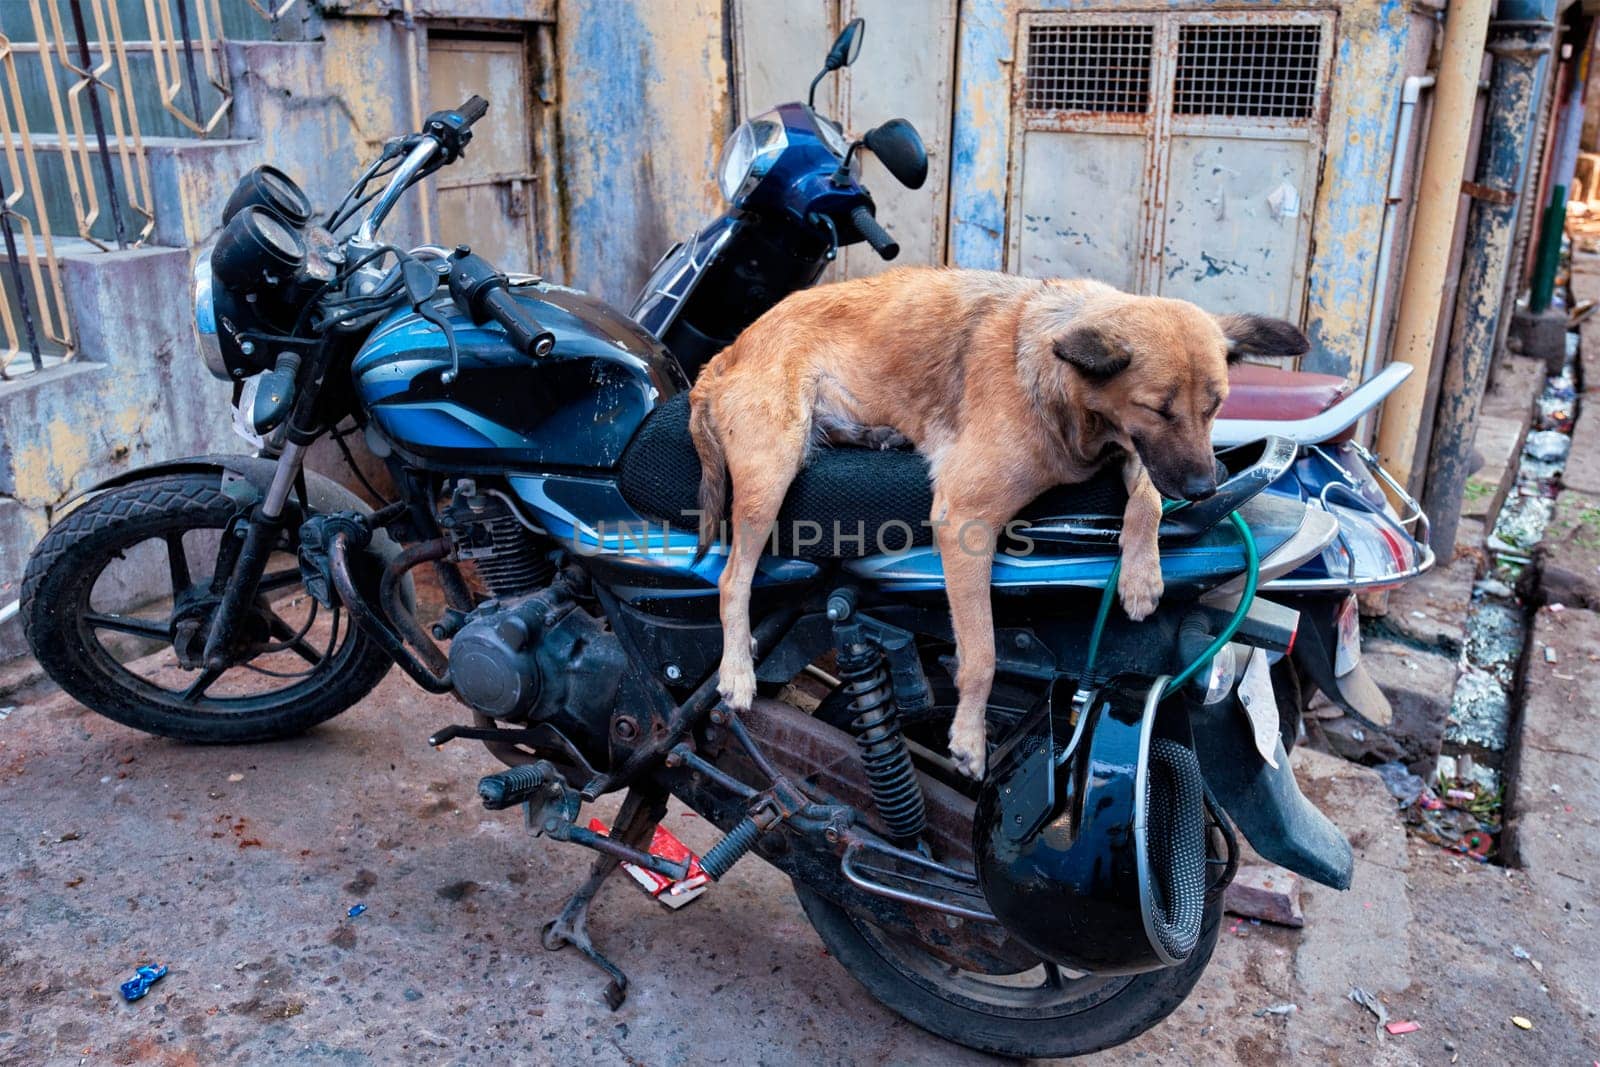 Dog sleeping on motorcycle in indian street by dimol